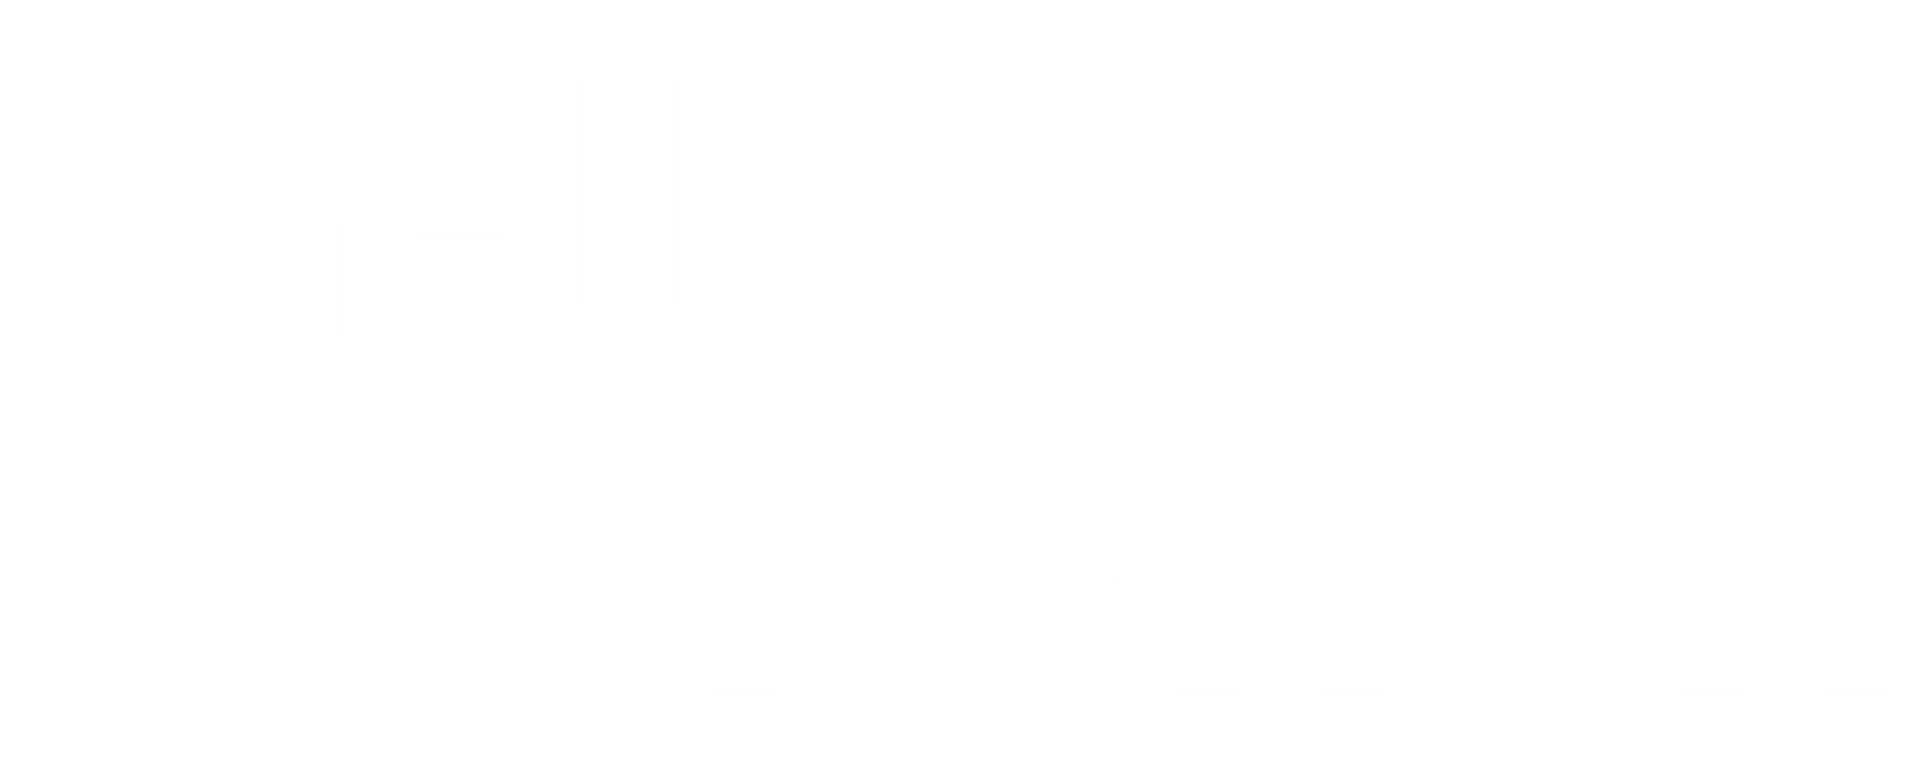 hello-growth-inverted